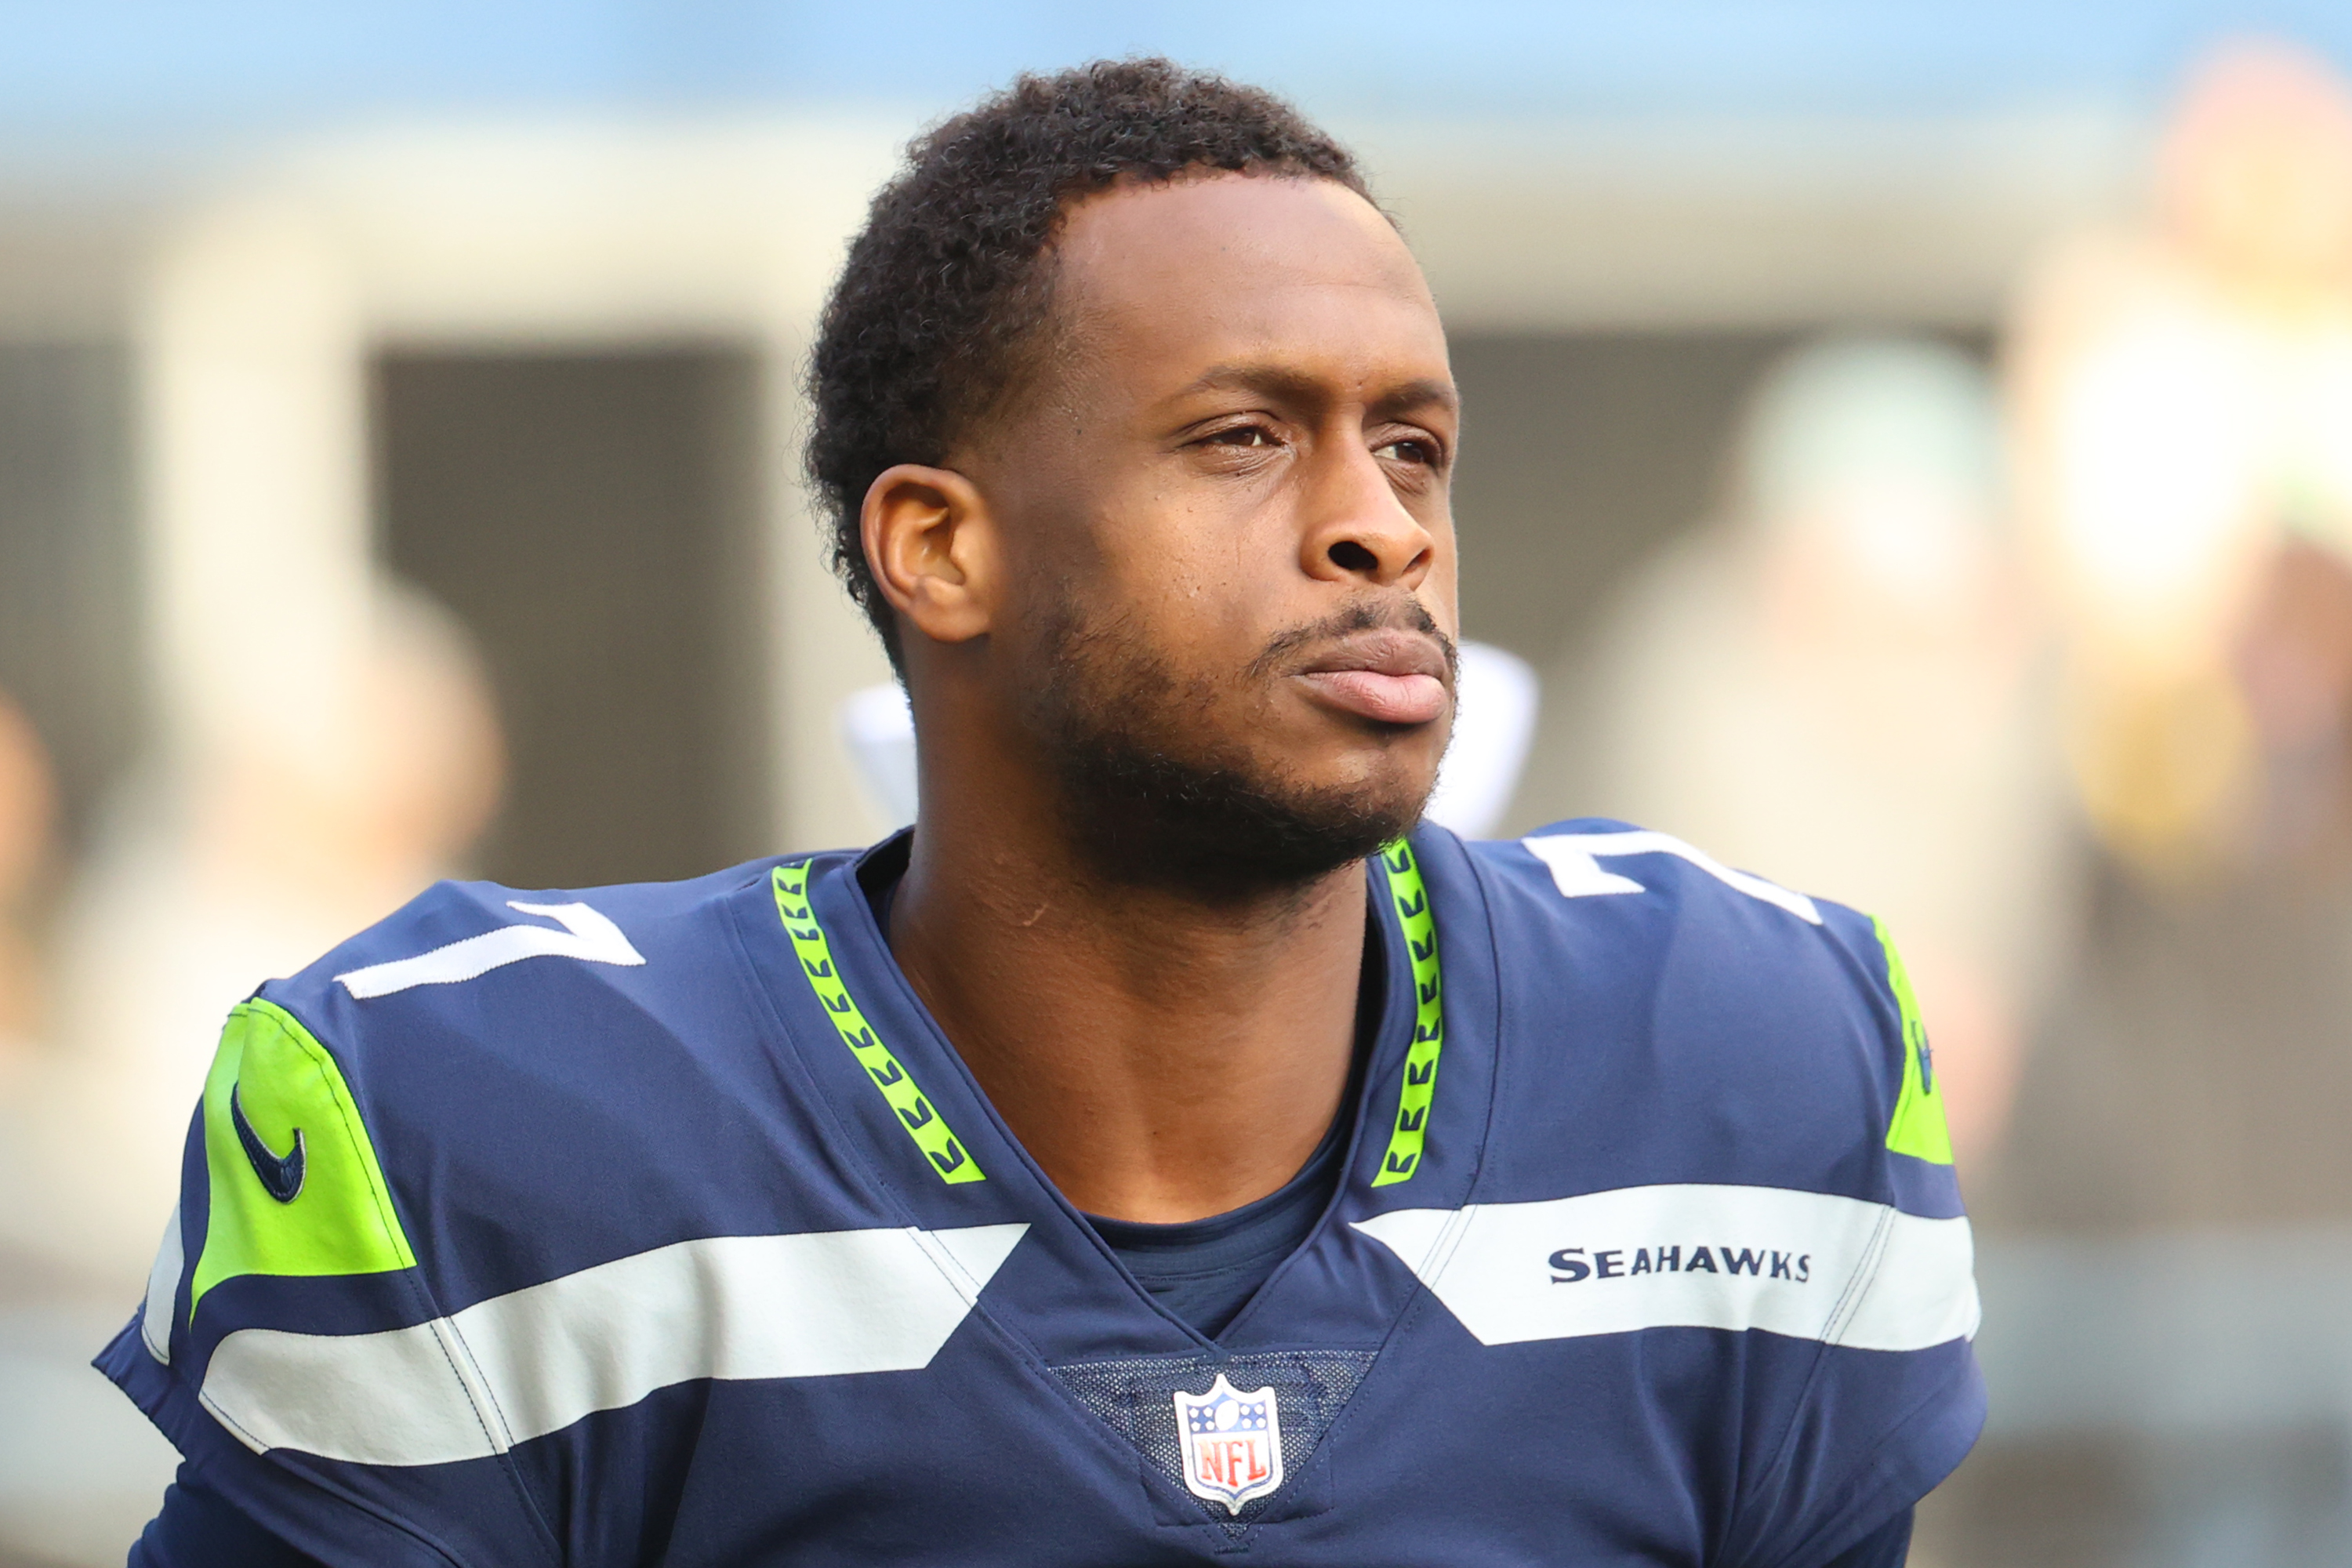 Seahawks' Geno Smith Arrested on Suspicion of DUI, Released on Bail